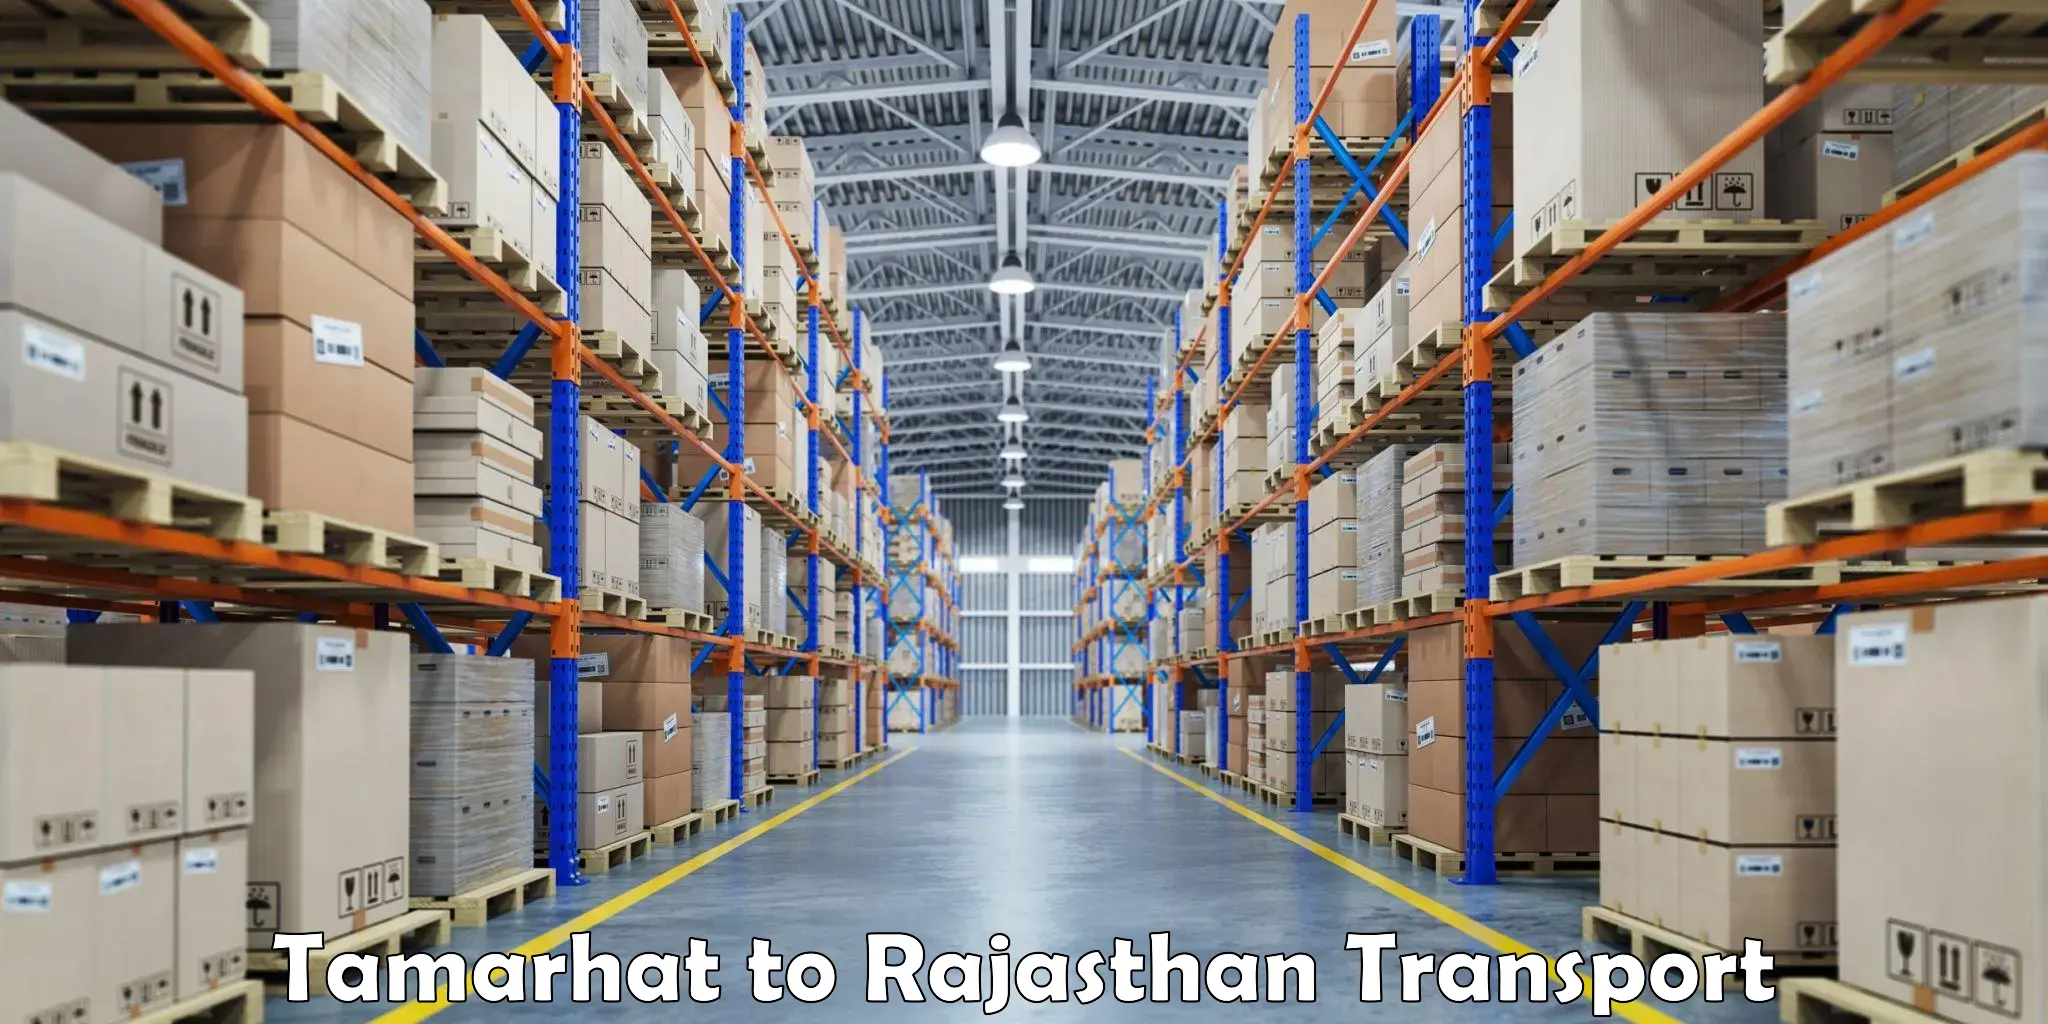 Truck transport companies in India Tamarhat to Rajasthan